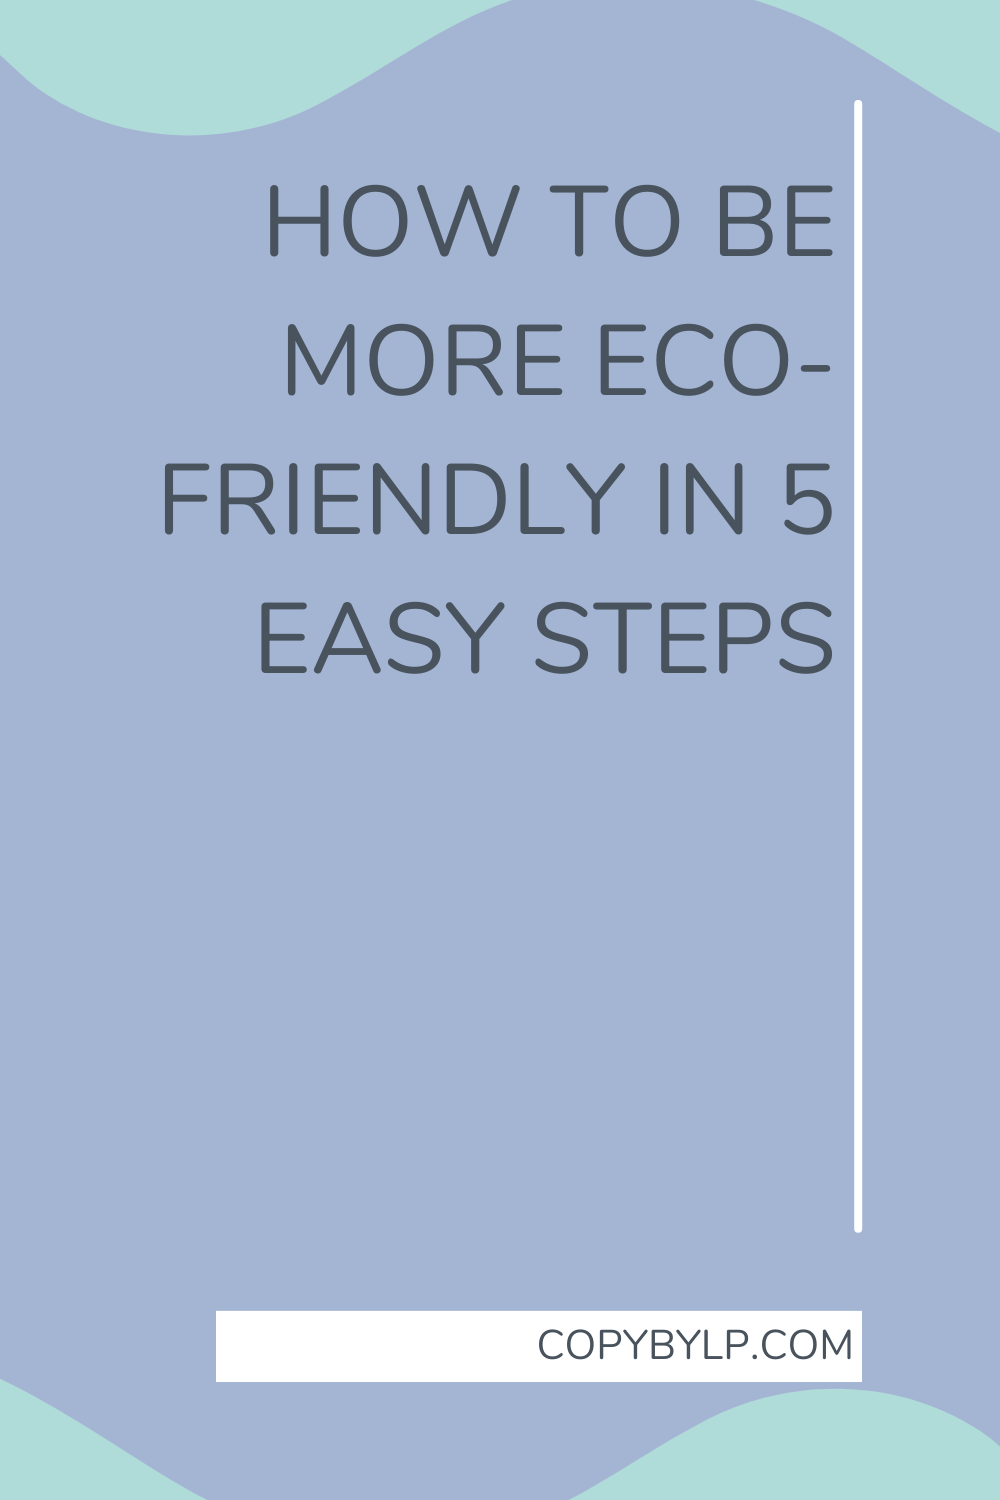 how to be more eco-friendly in 5 easy steps graphic